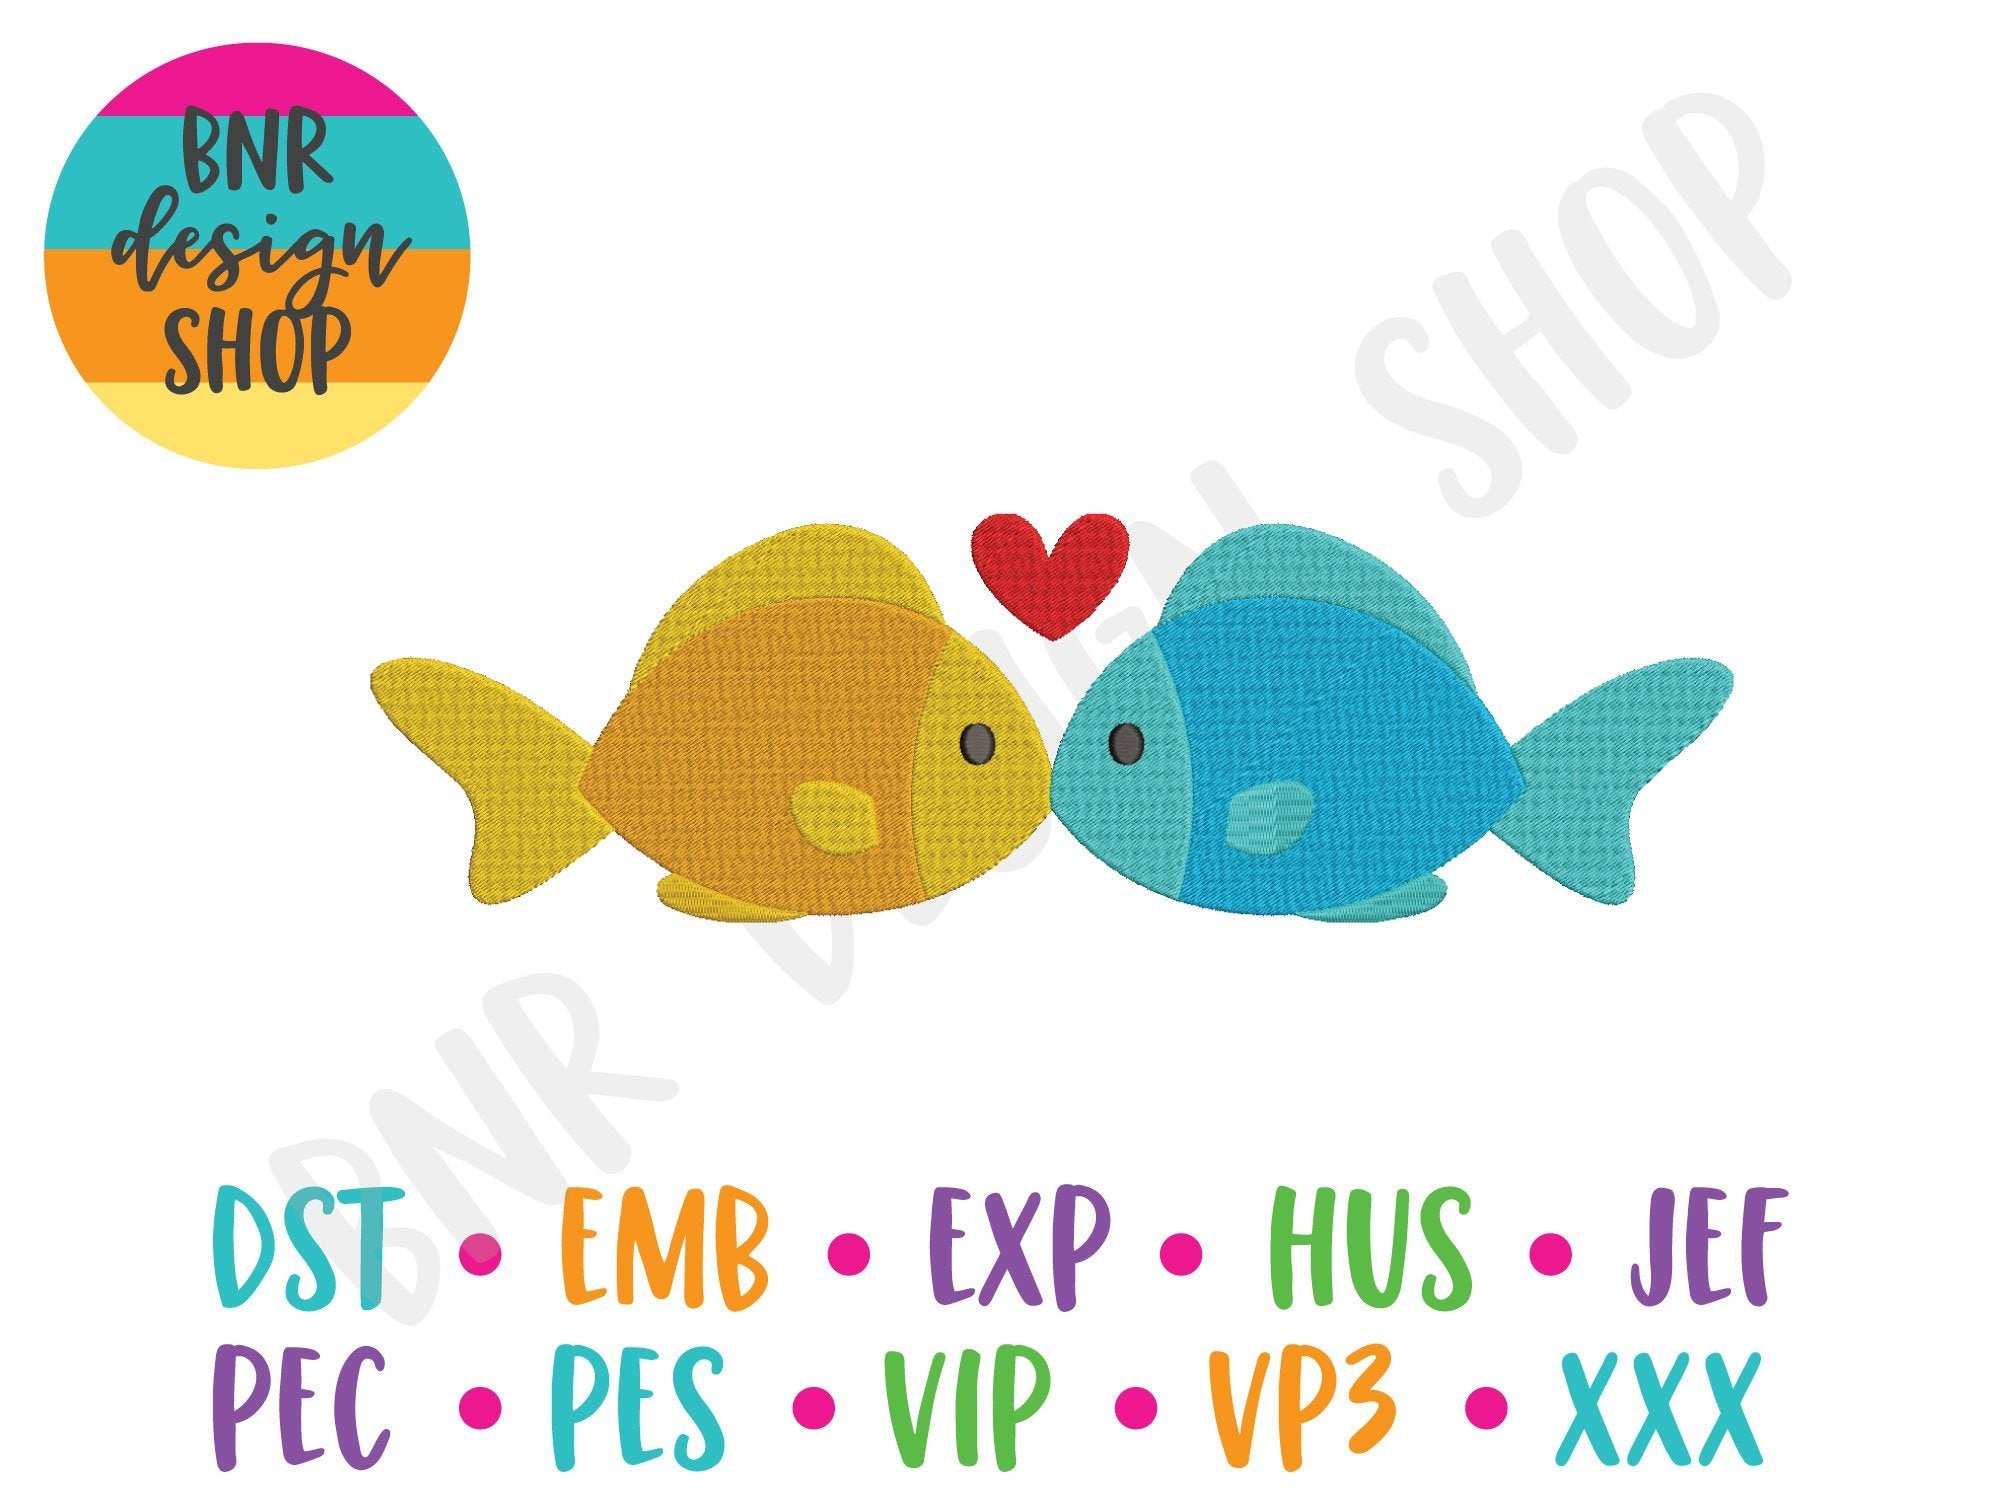 two fish kissing clipart